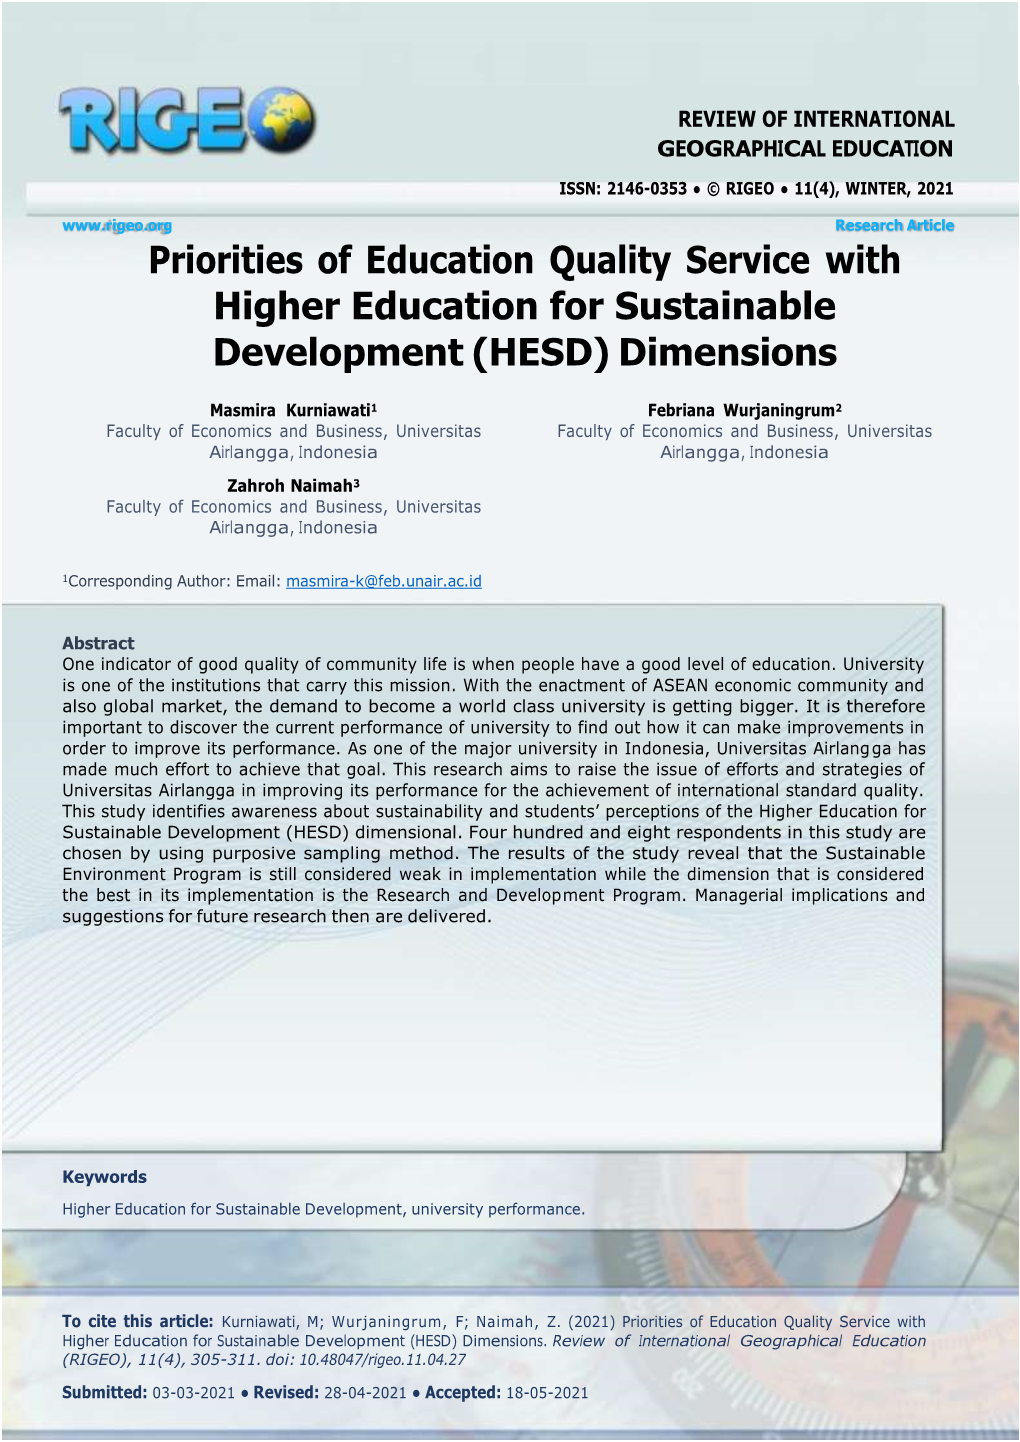 Priorities of Education Quality Service with Higher Education for Sustainable Development (HESD) Dimensions